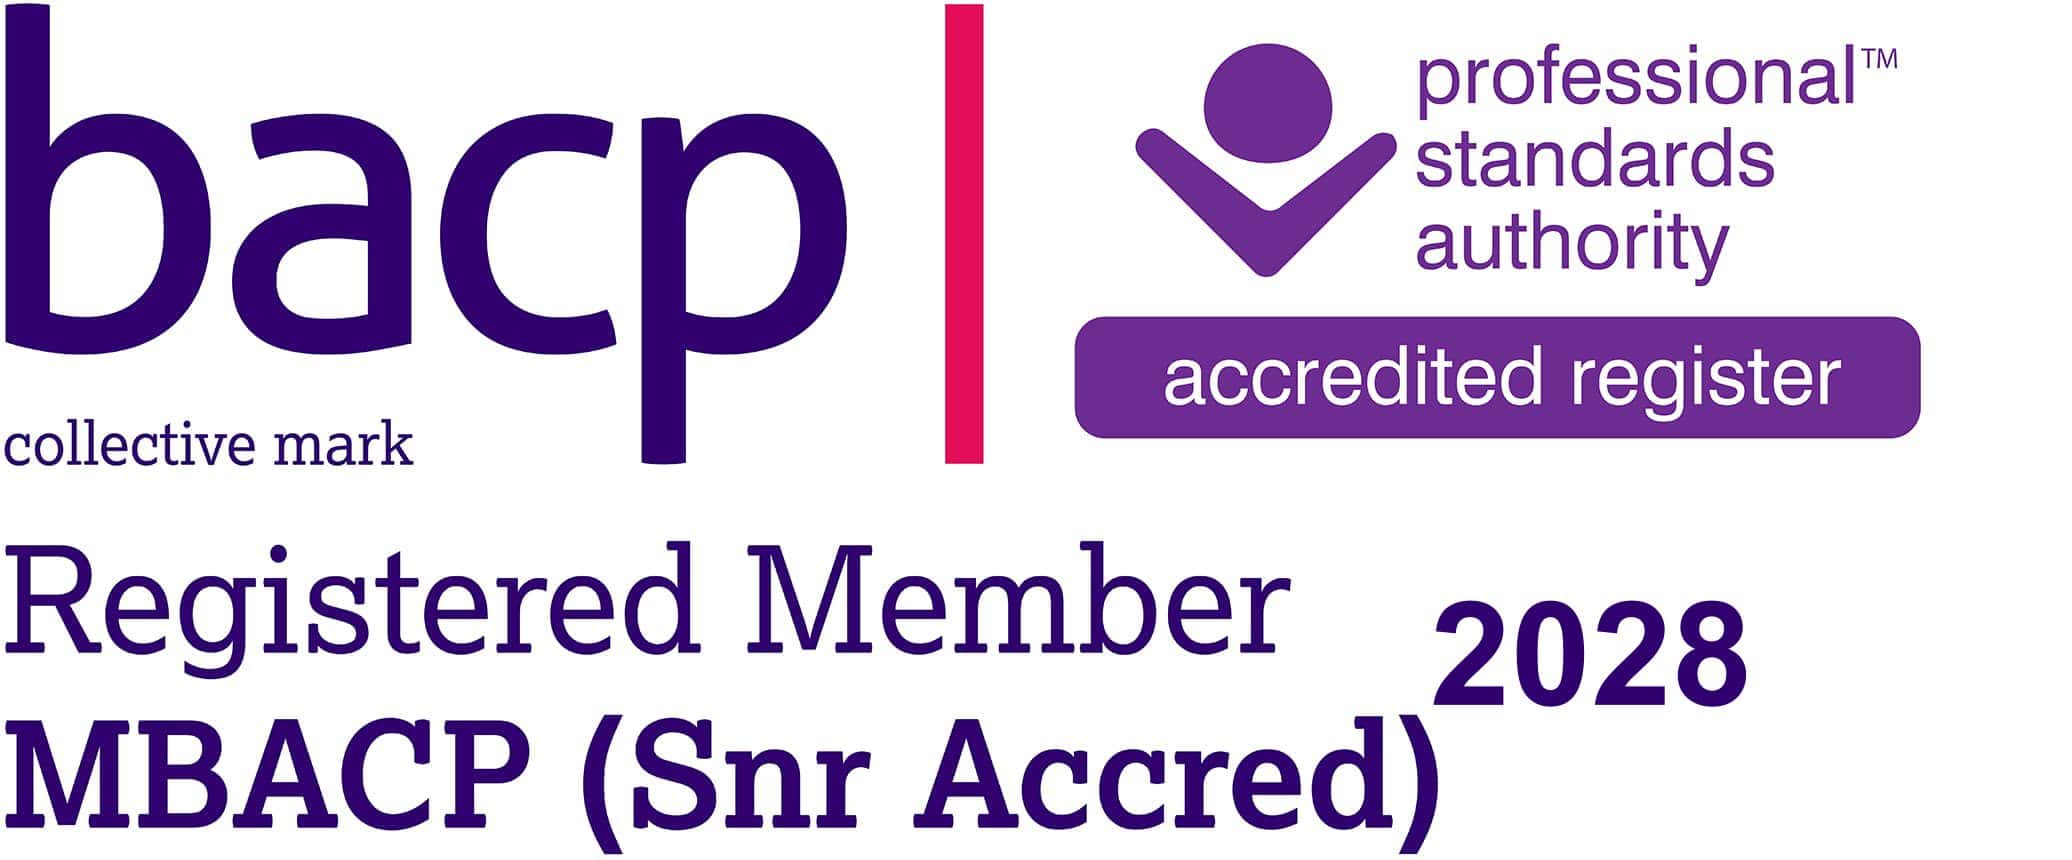 Wendy Bramham - MBACP (Sir Accred) registered member no. 2028